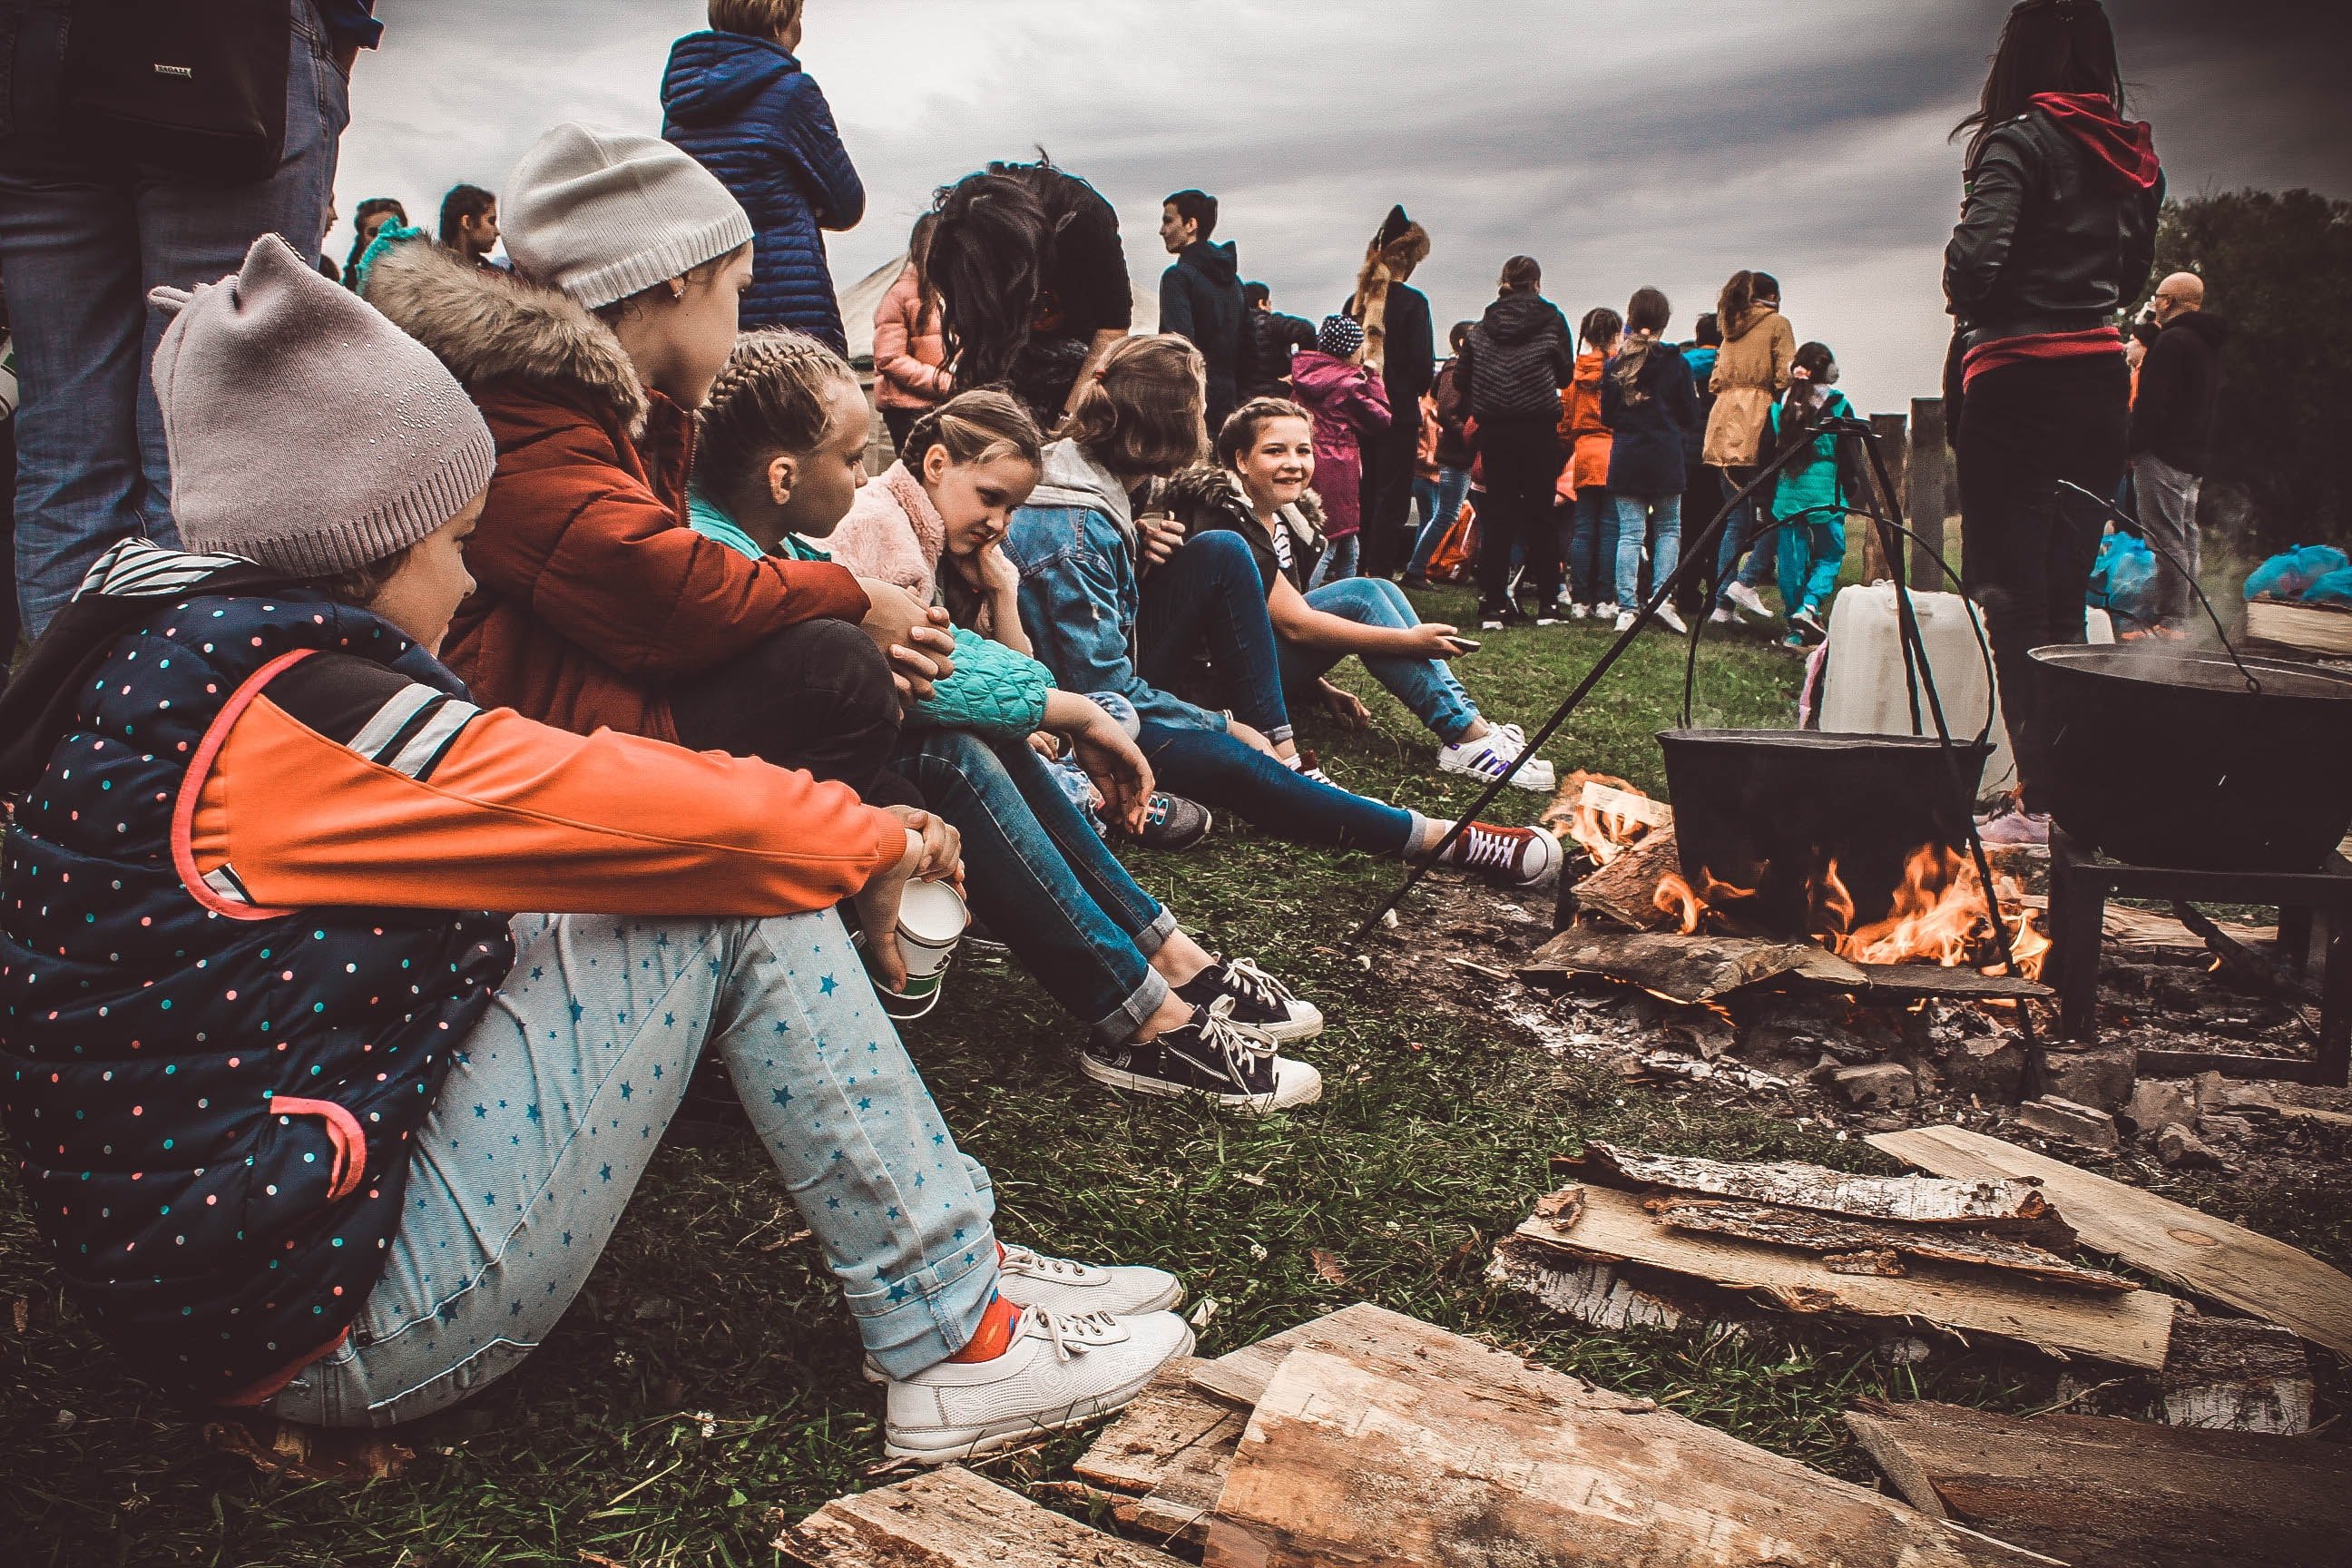 Group of kids sitting next to a fire pit | Source: Unsplash